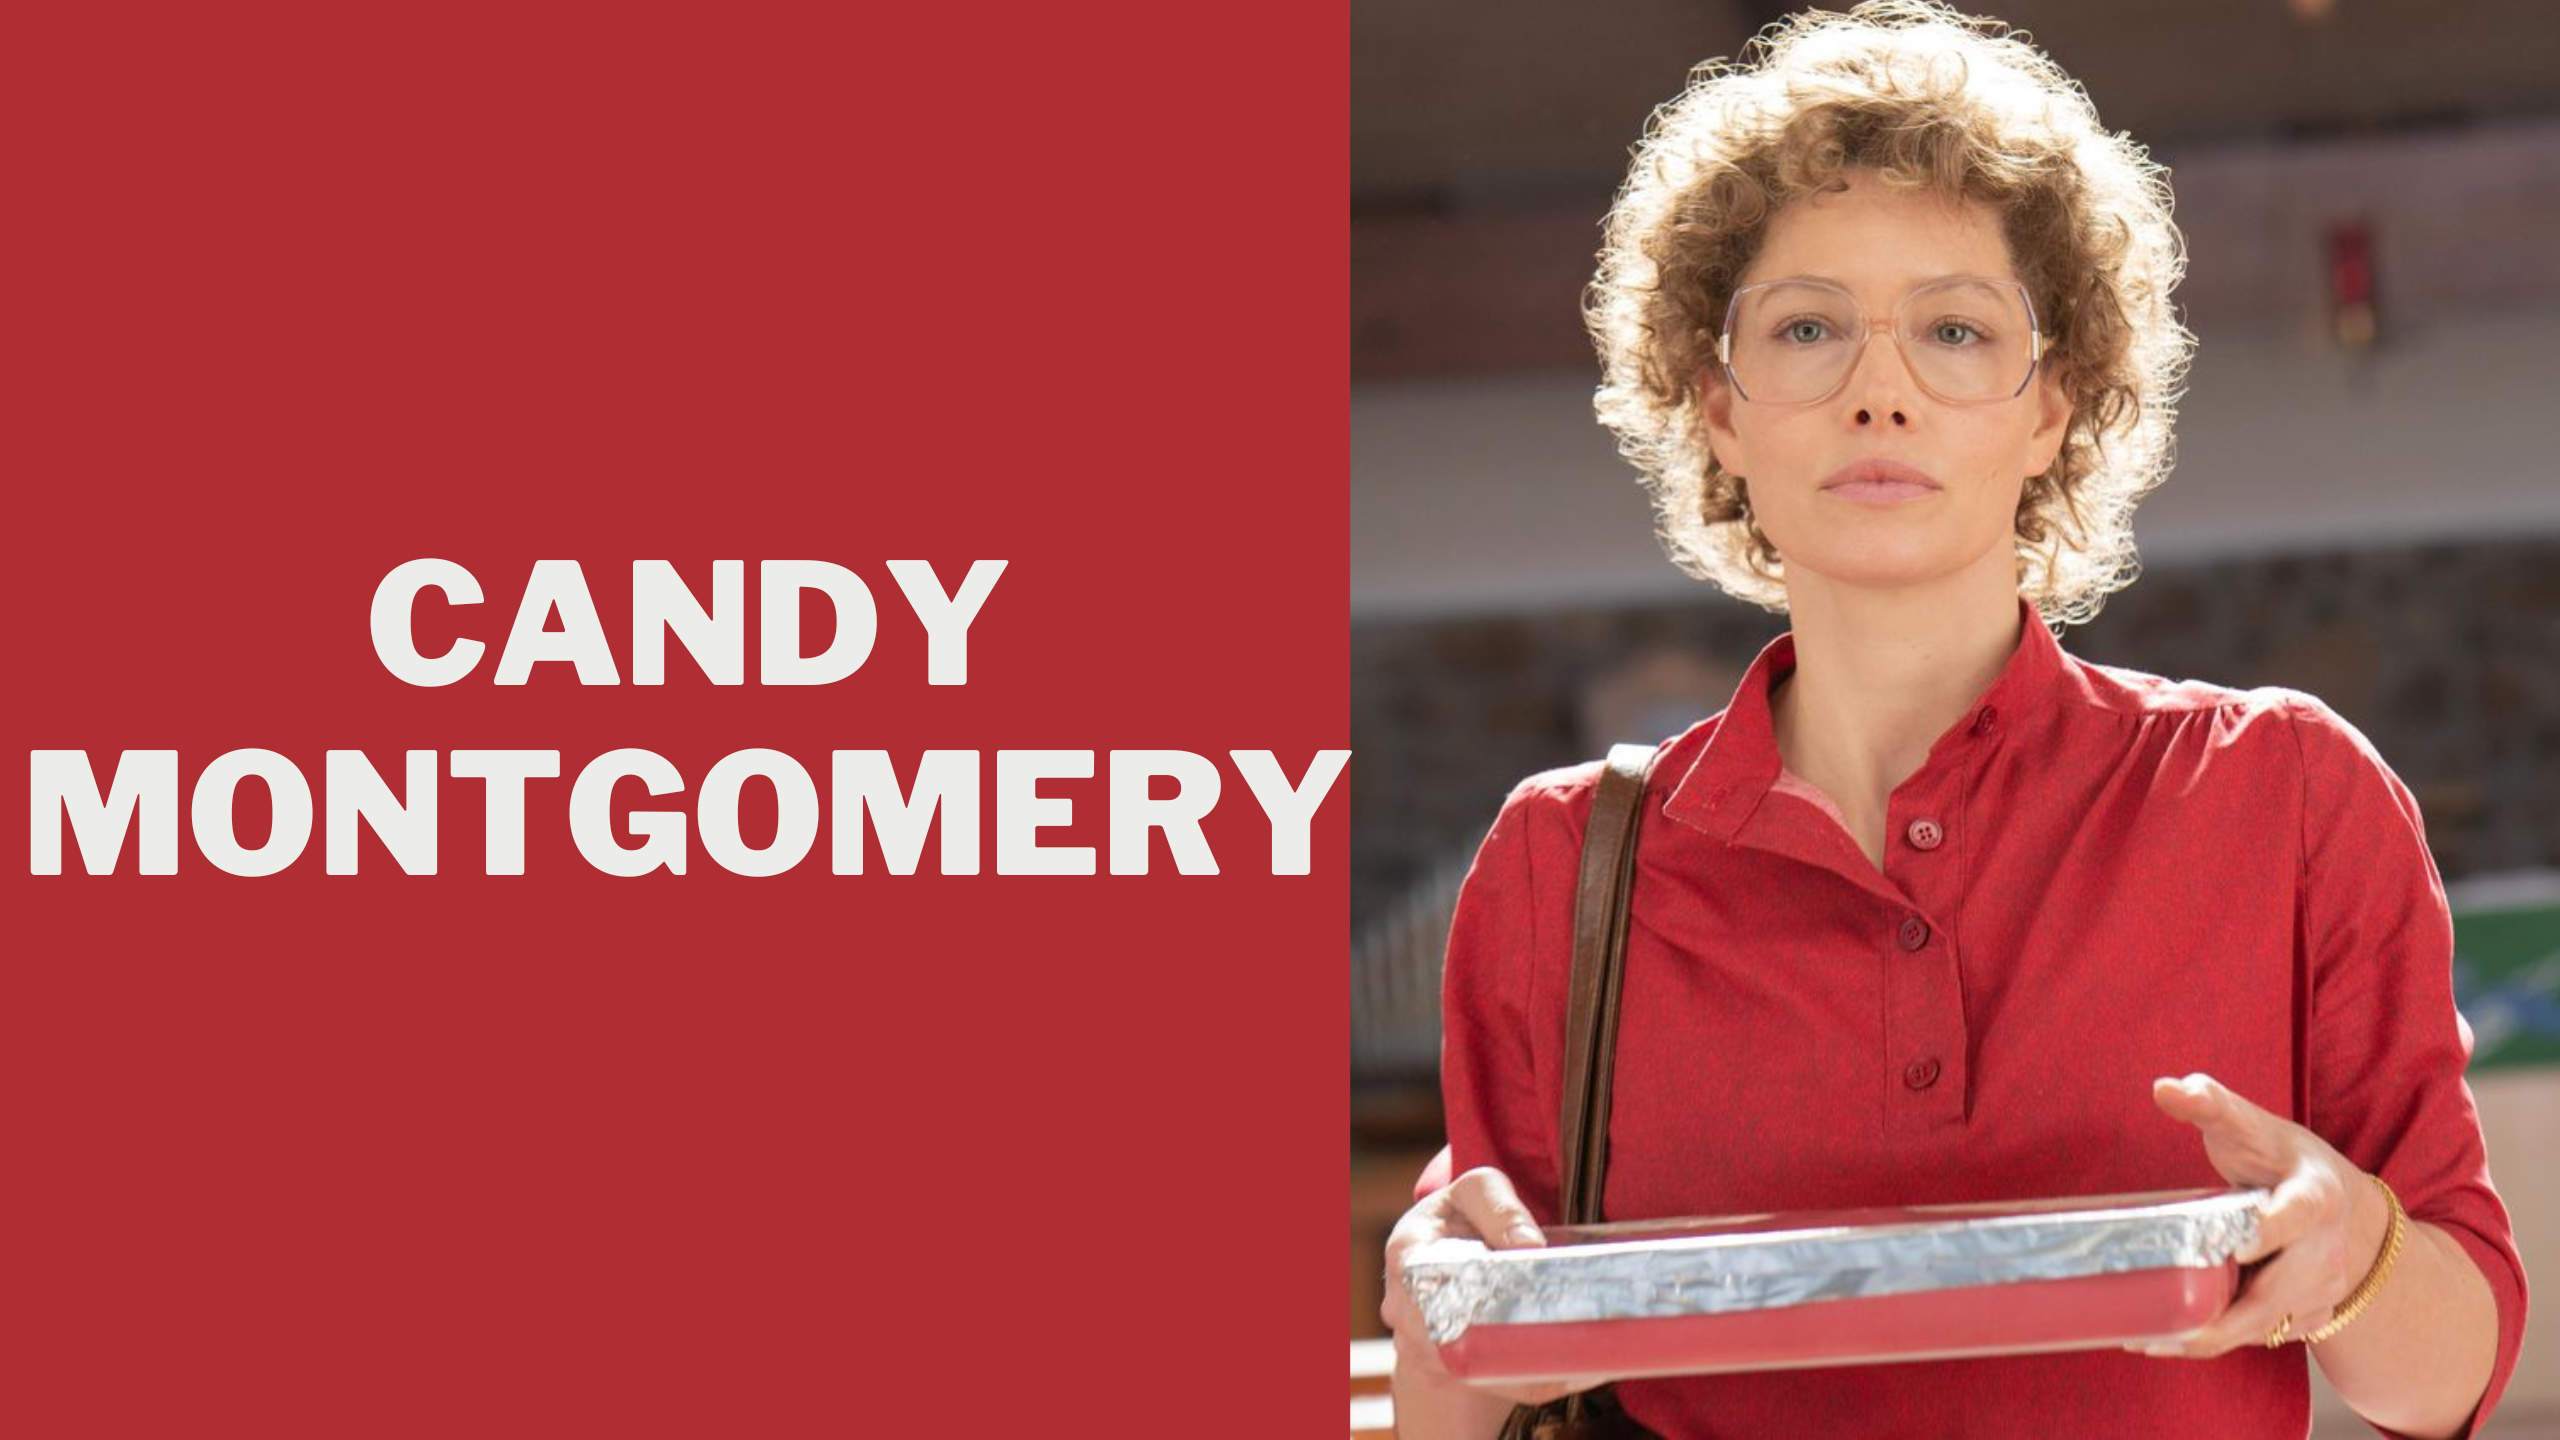 What Happened to Candy Montgomery